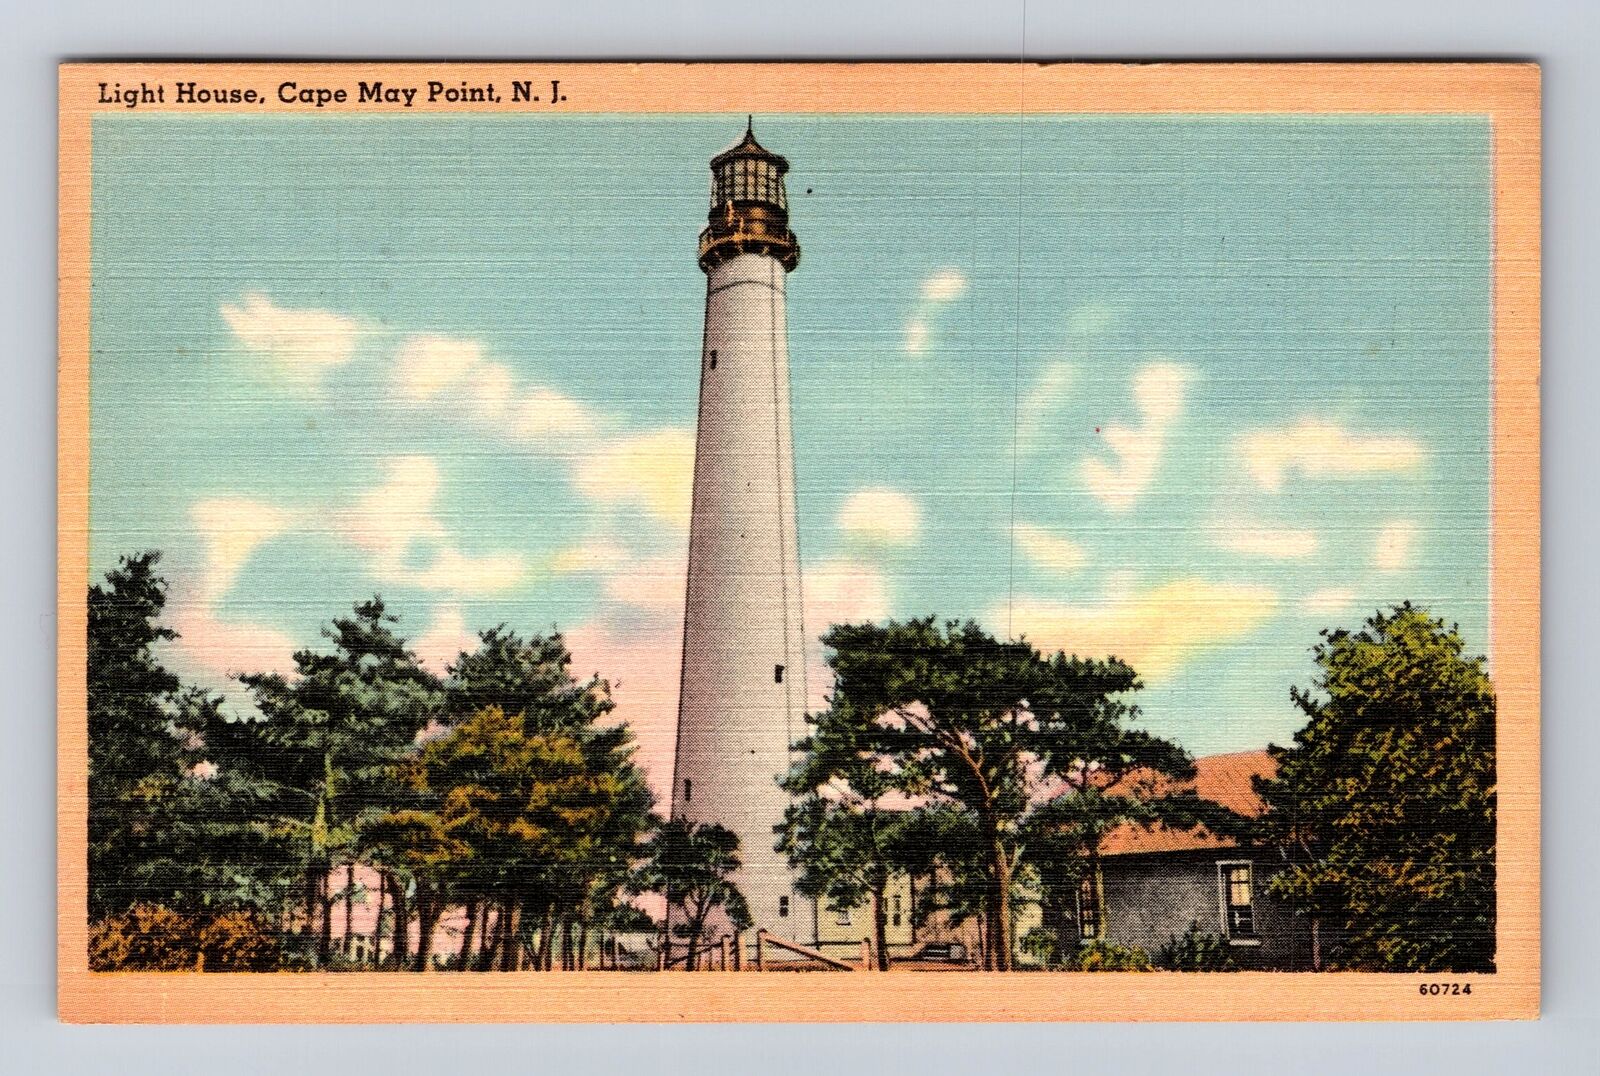 Cape May Point NJ-New Jersey, Cape May Point Light House, Vintage c1949 Postcard